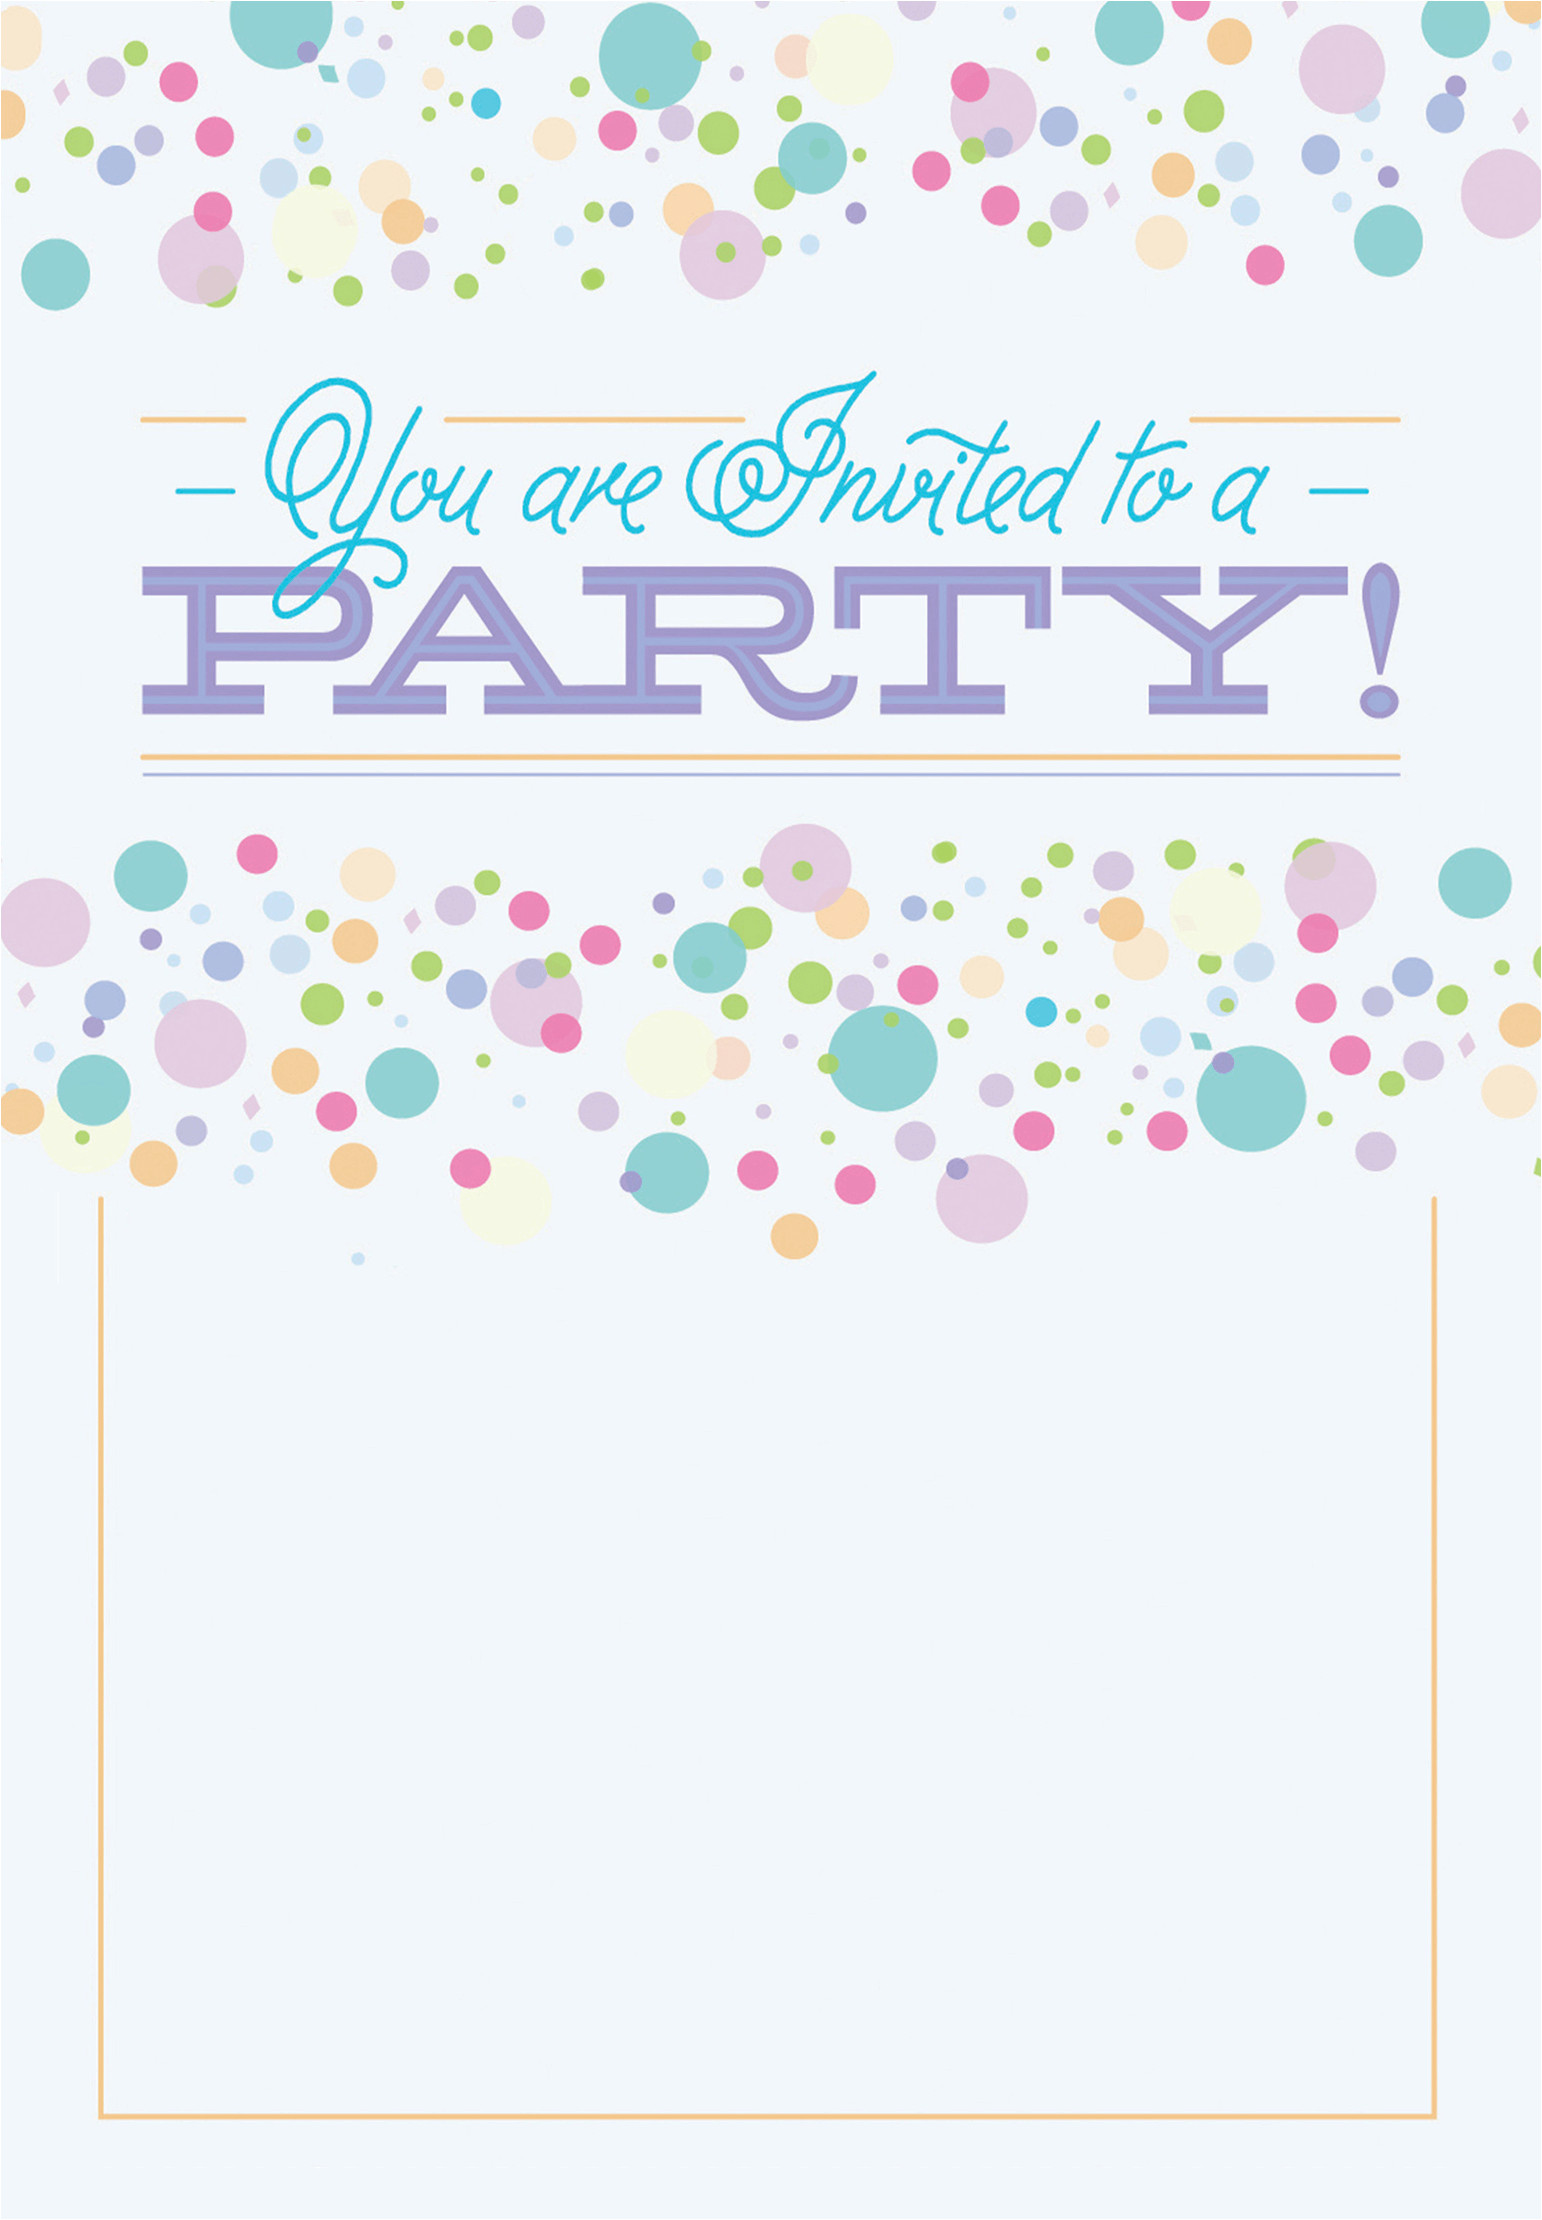 Free Printable Party Invitation Templates Greetings island Polka Dots Free Printable Party Invitation Template